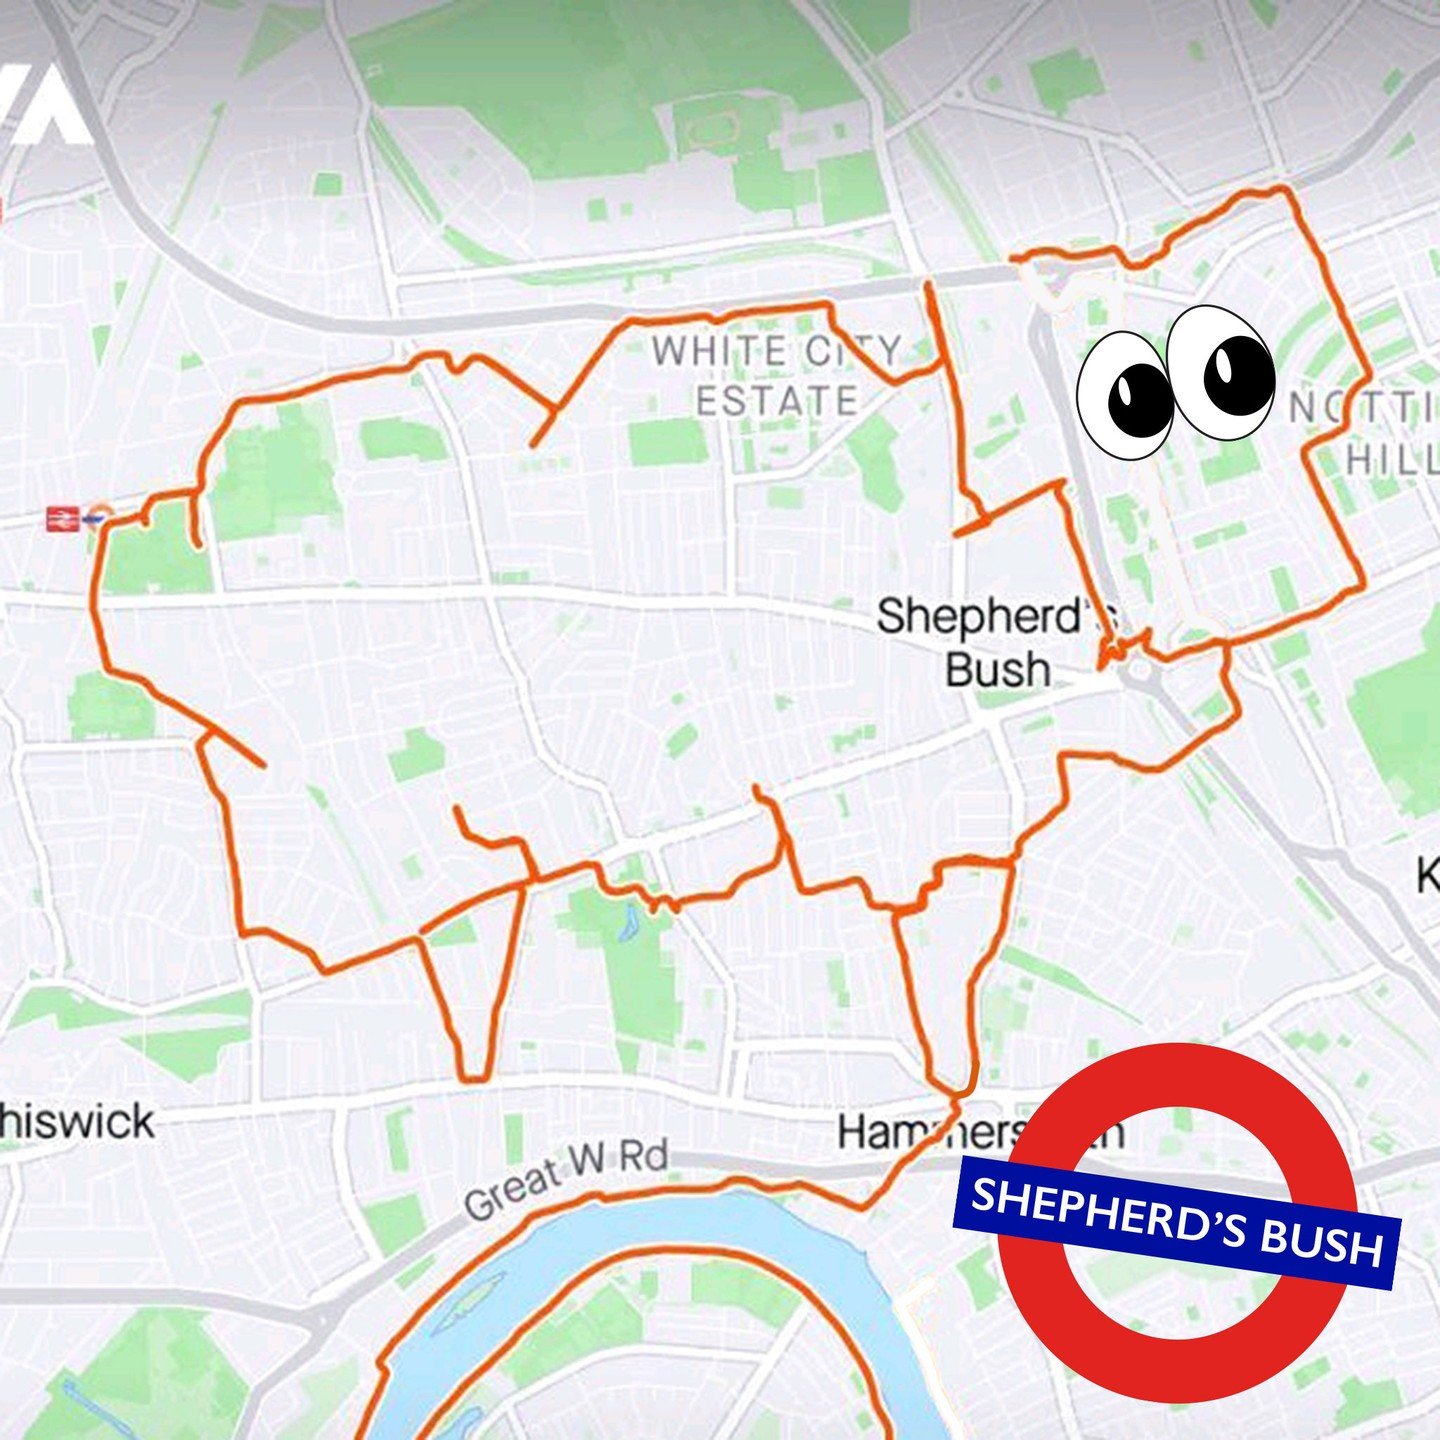 It's the London Marathon on Sunday 🏃&zwj;♀️🏃🏿🏃&zwj;♂️

So whilst training for the big event @mind.the.map.strava decided to run around a few London Underground stations while drawing their literal meanings 🤓

We're just wondering if they're goin